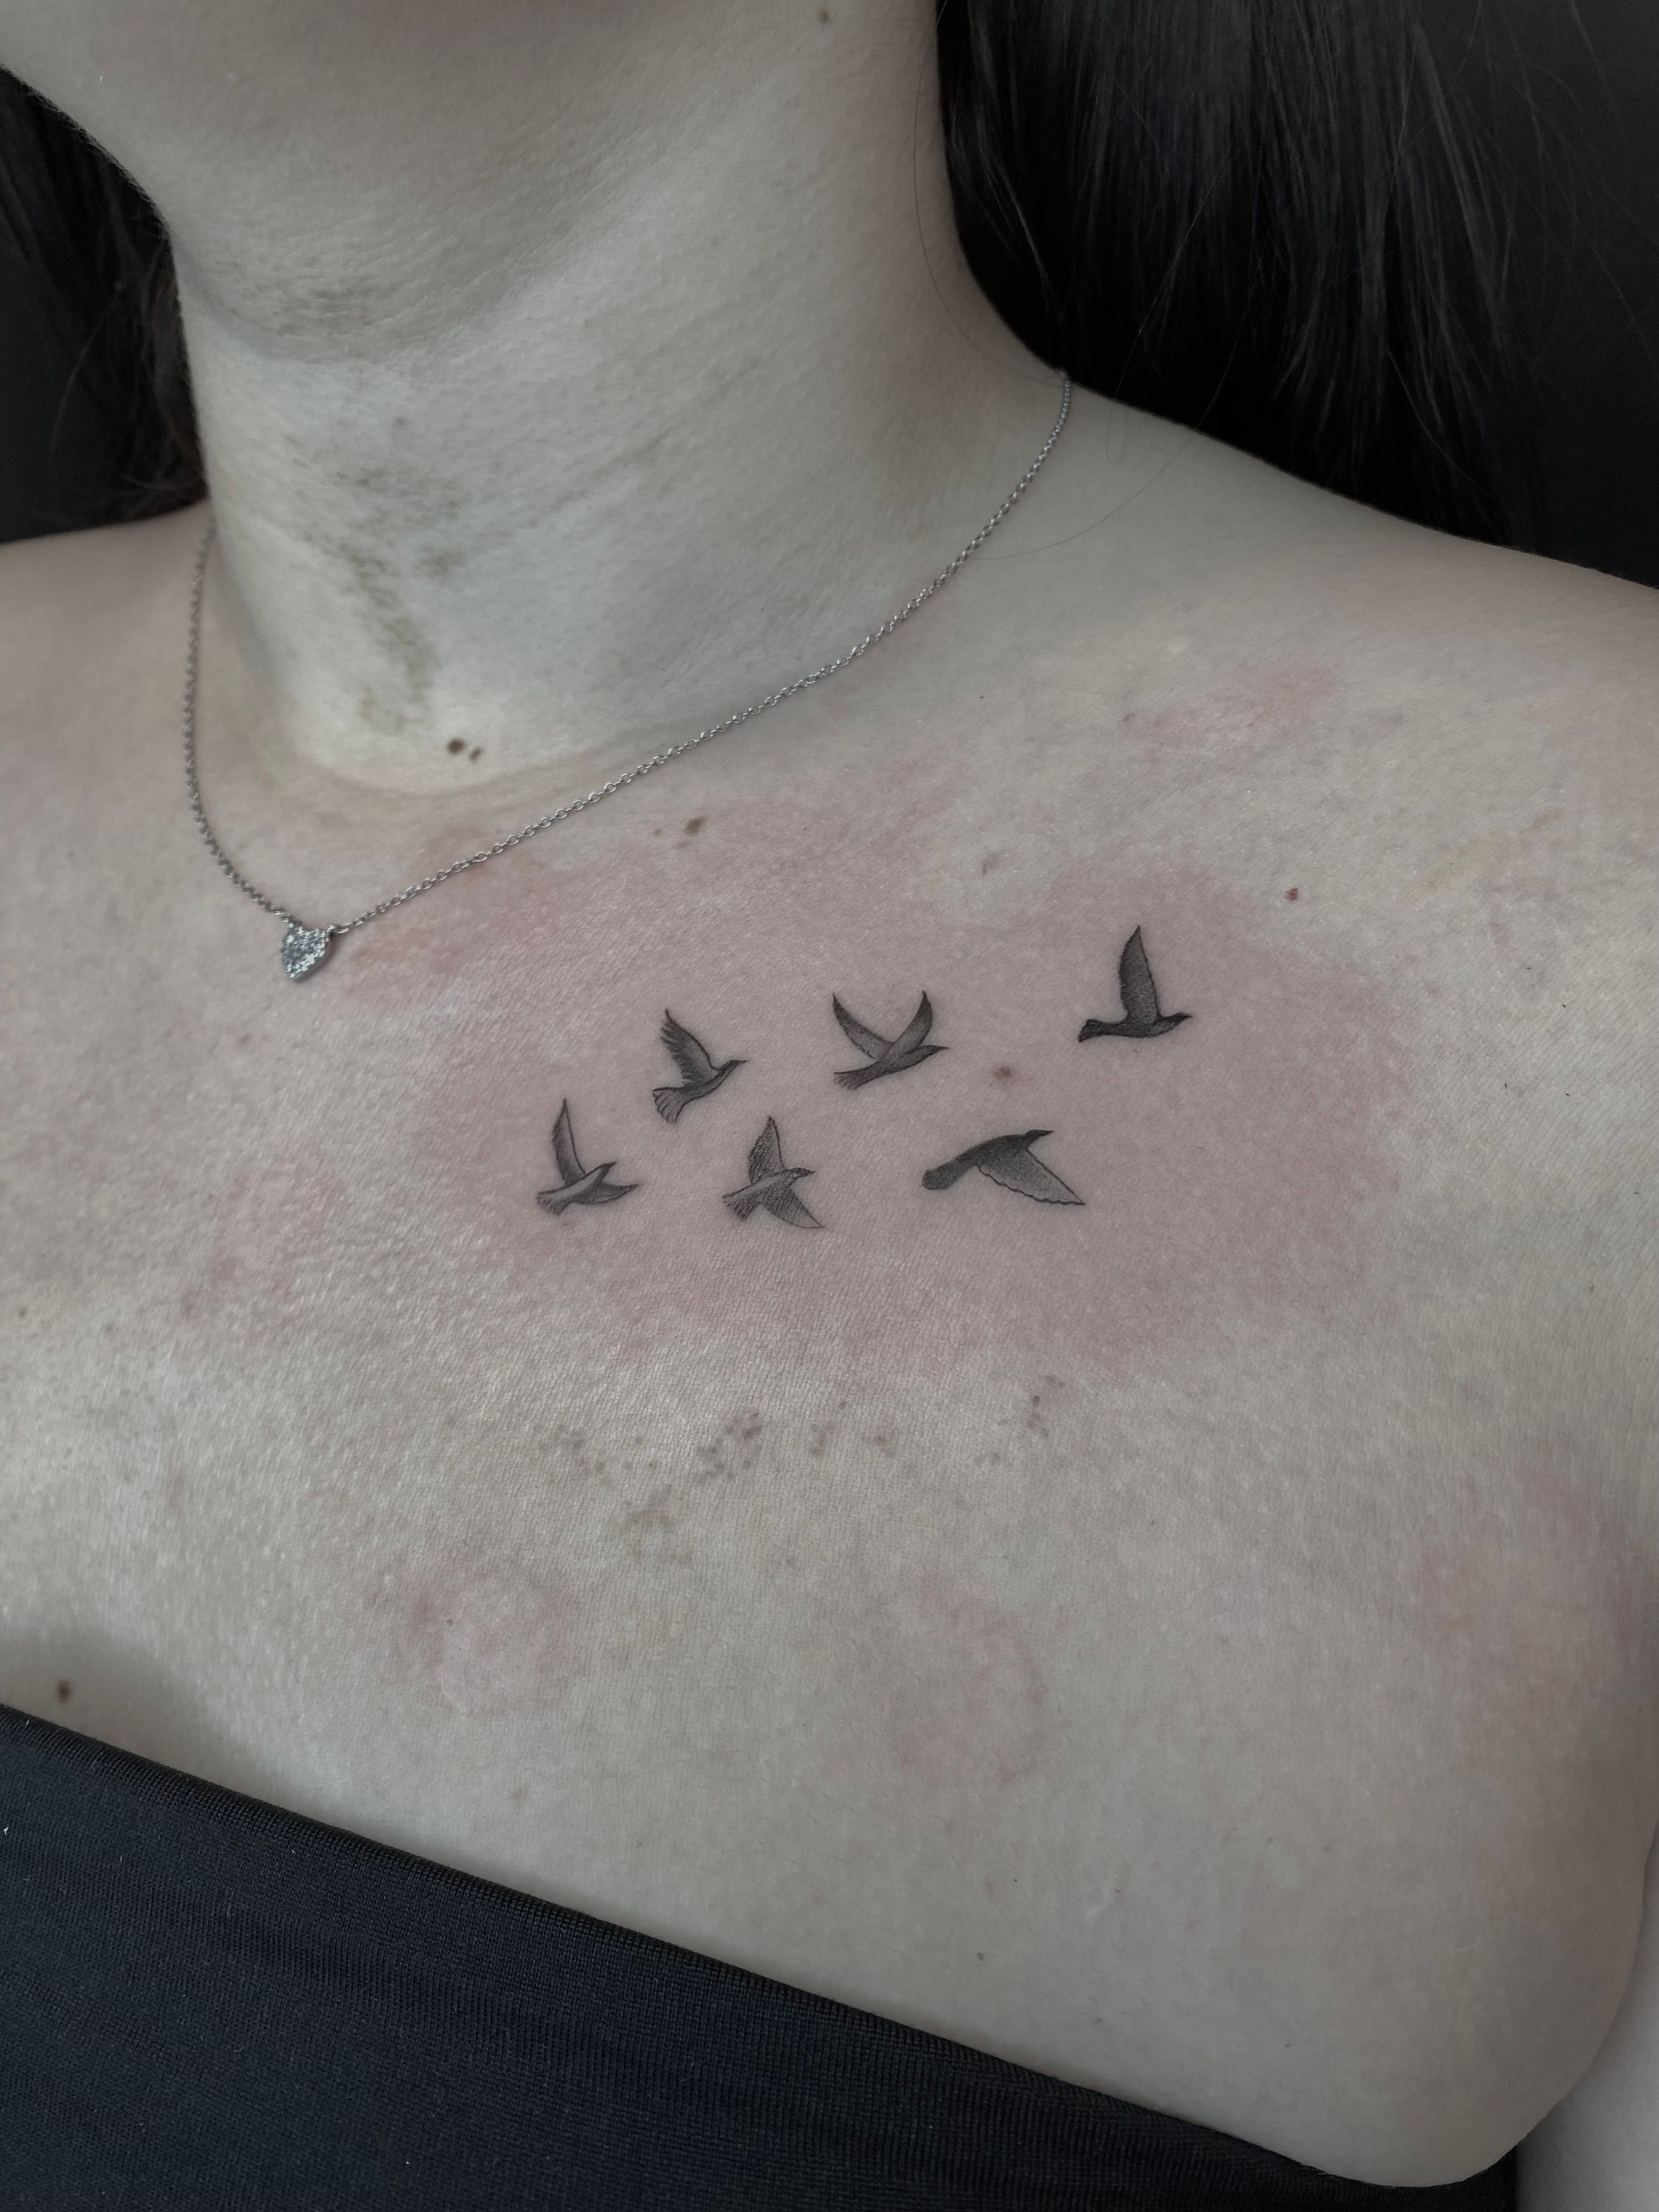 50 Cute Clavicle Tattoos for Women | Art and Design